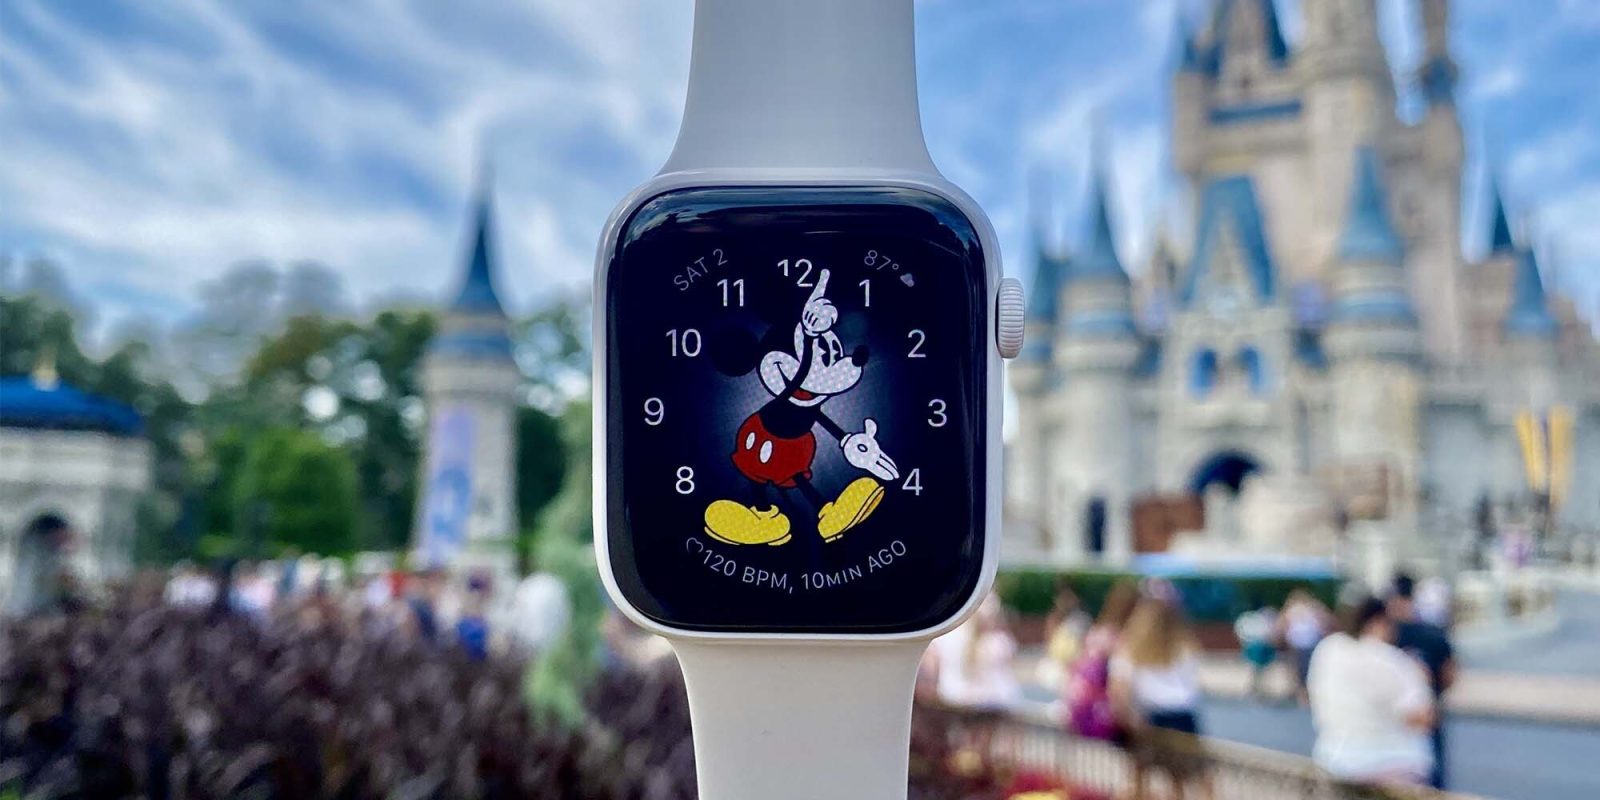 Guest drops Apple Watch on Disney World ride, claims $40,000 in fraudulent credit card charges